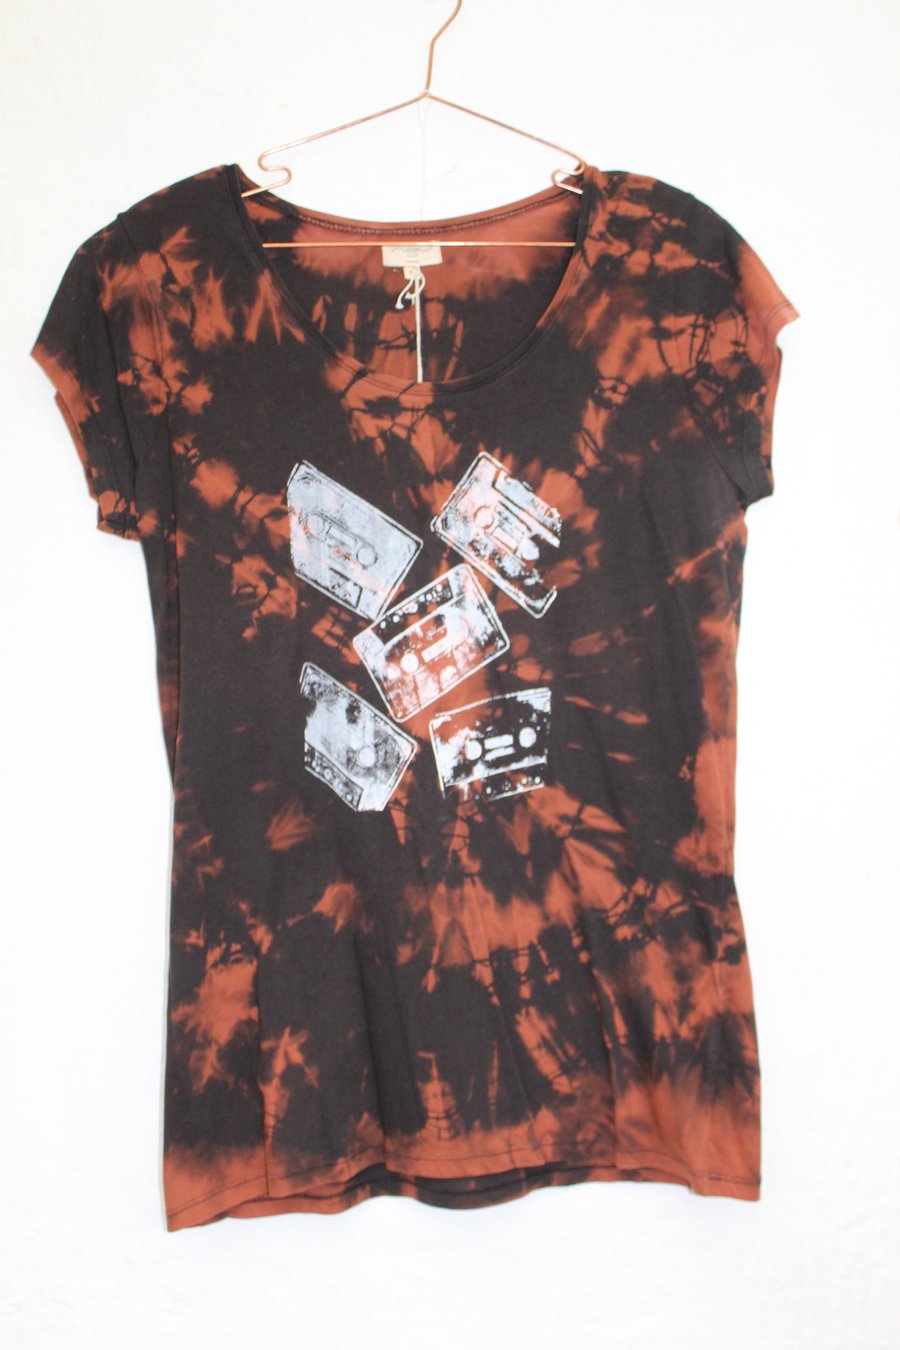 Ladies size 16 T shirt, reworked Eco tie dyed clothing retro tape cassette print